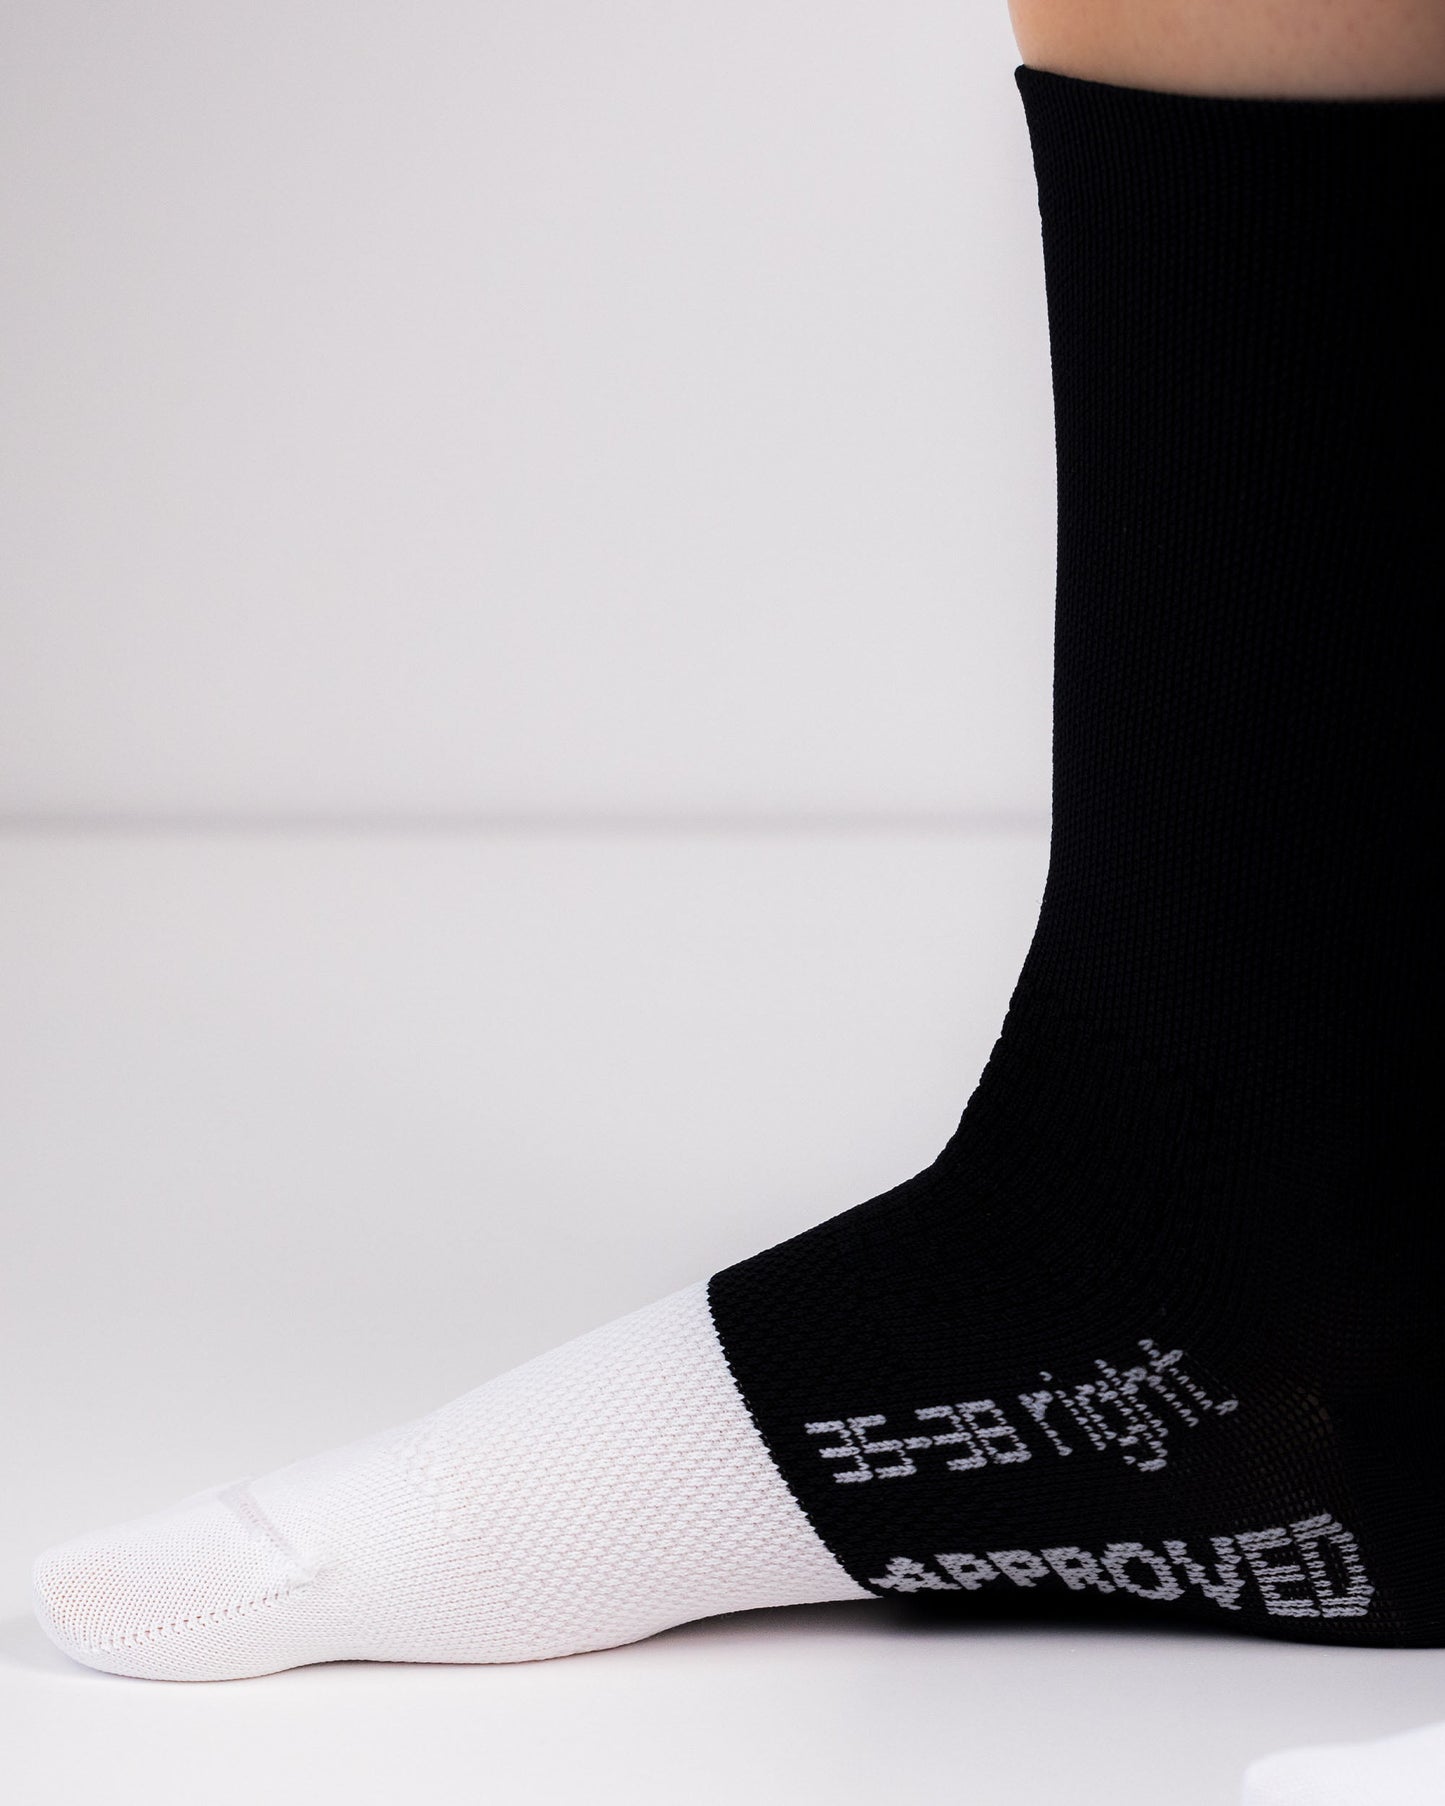 Approved cycling socks Luckiez